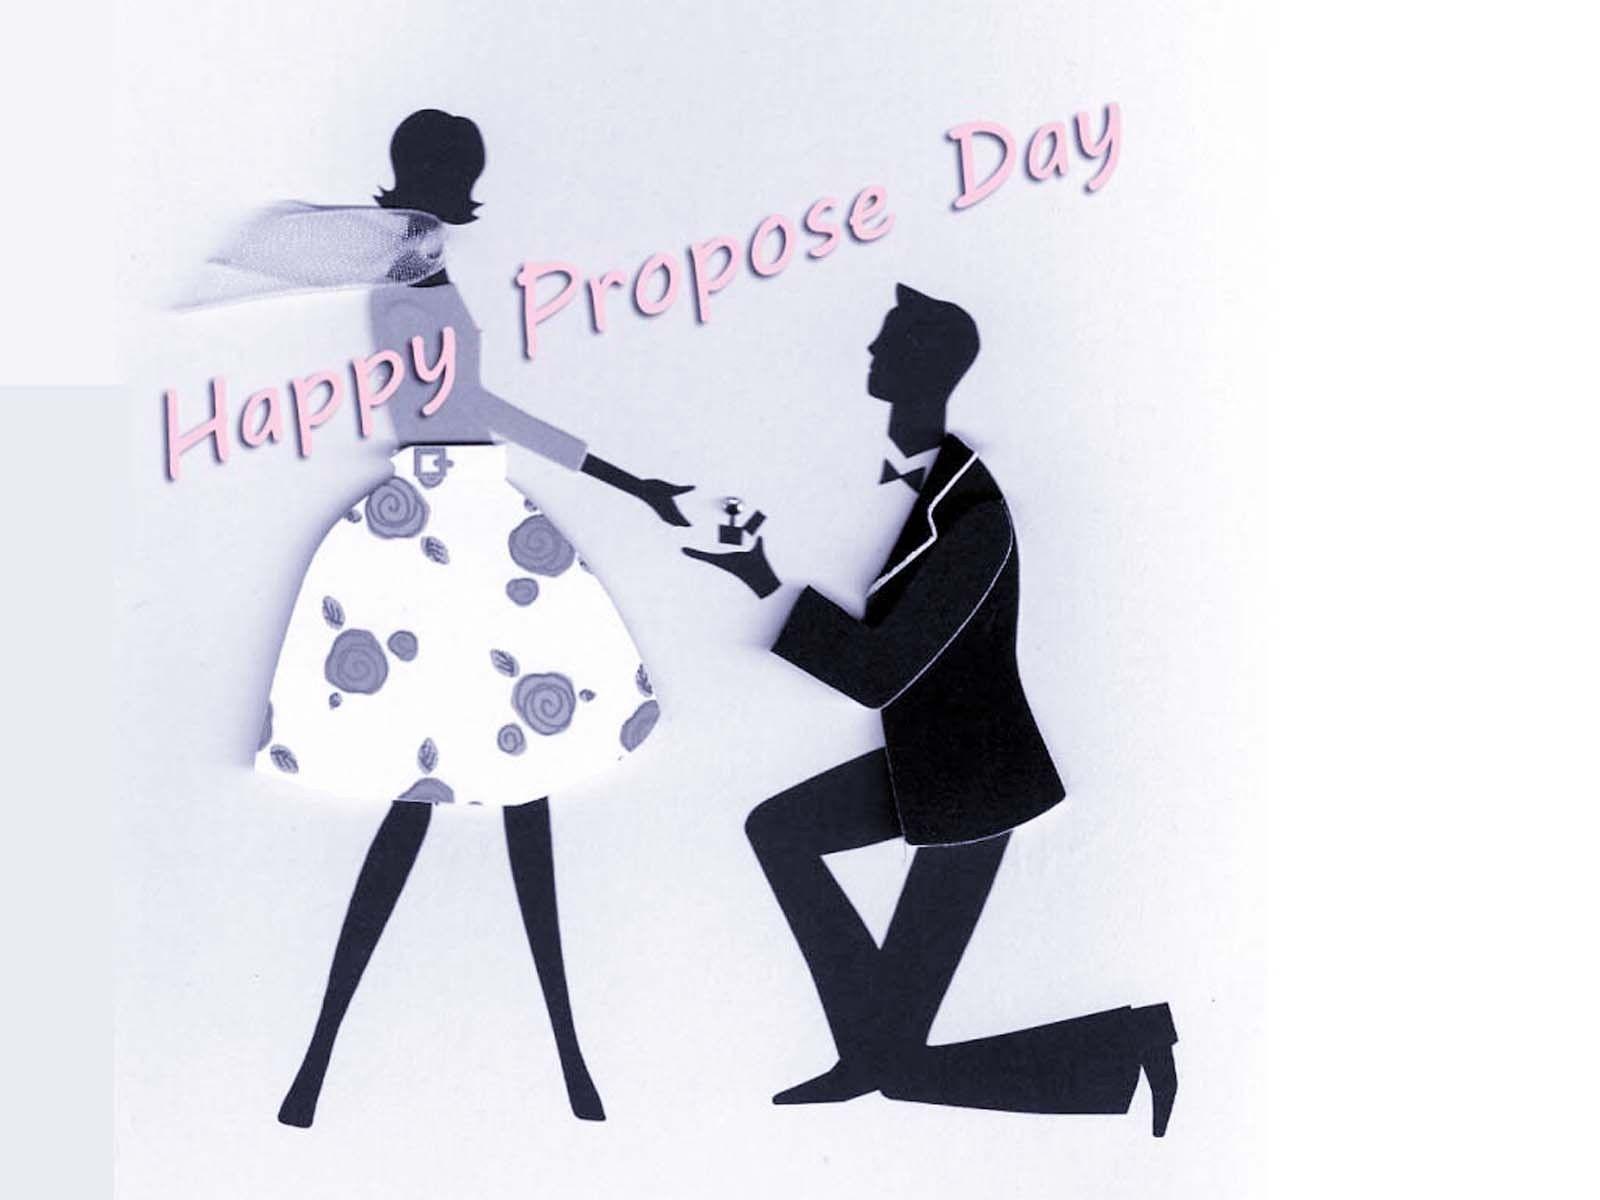 Happy Propose Day Image 2017 Greetings 8th February Wallpaper HD